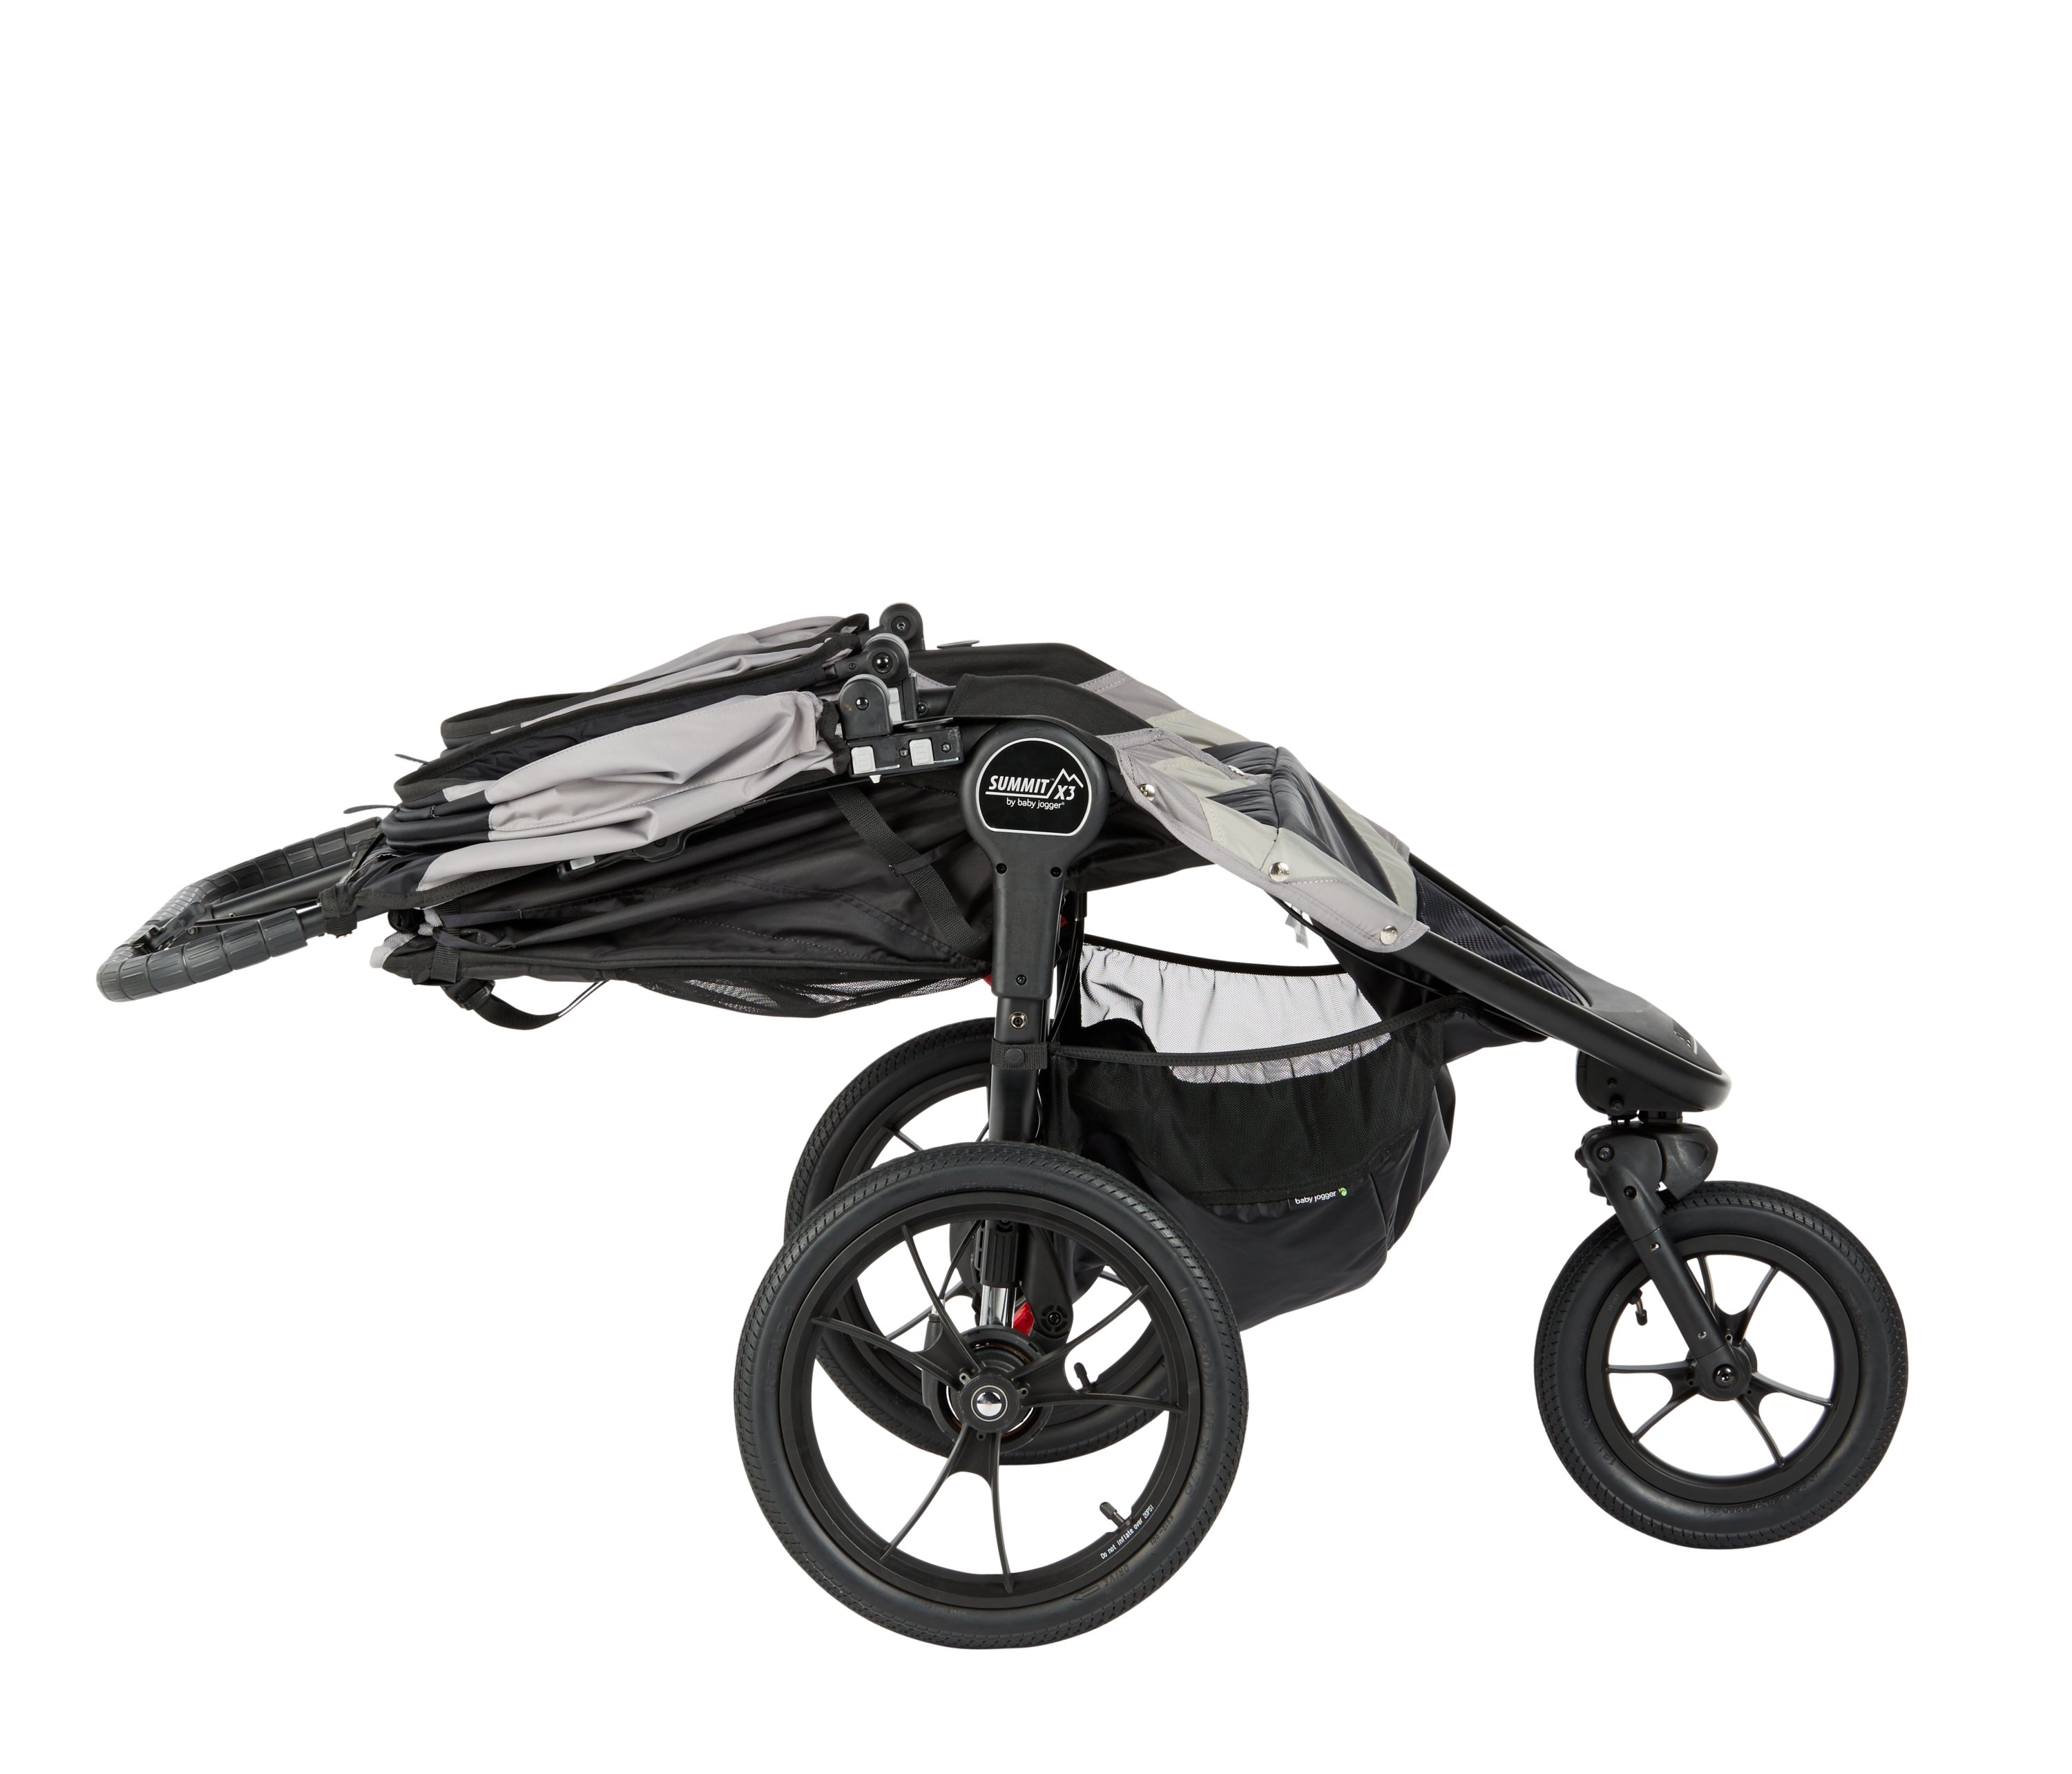 baby jogger summit 360 double